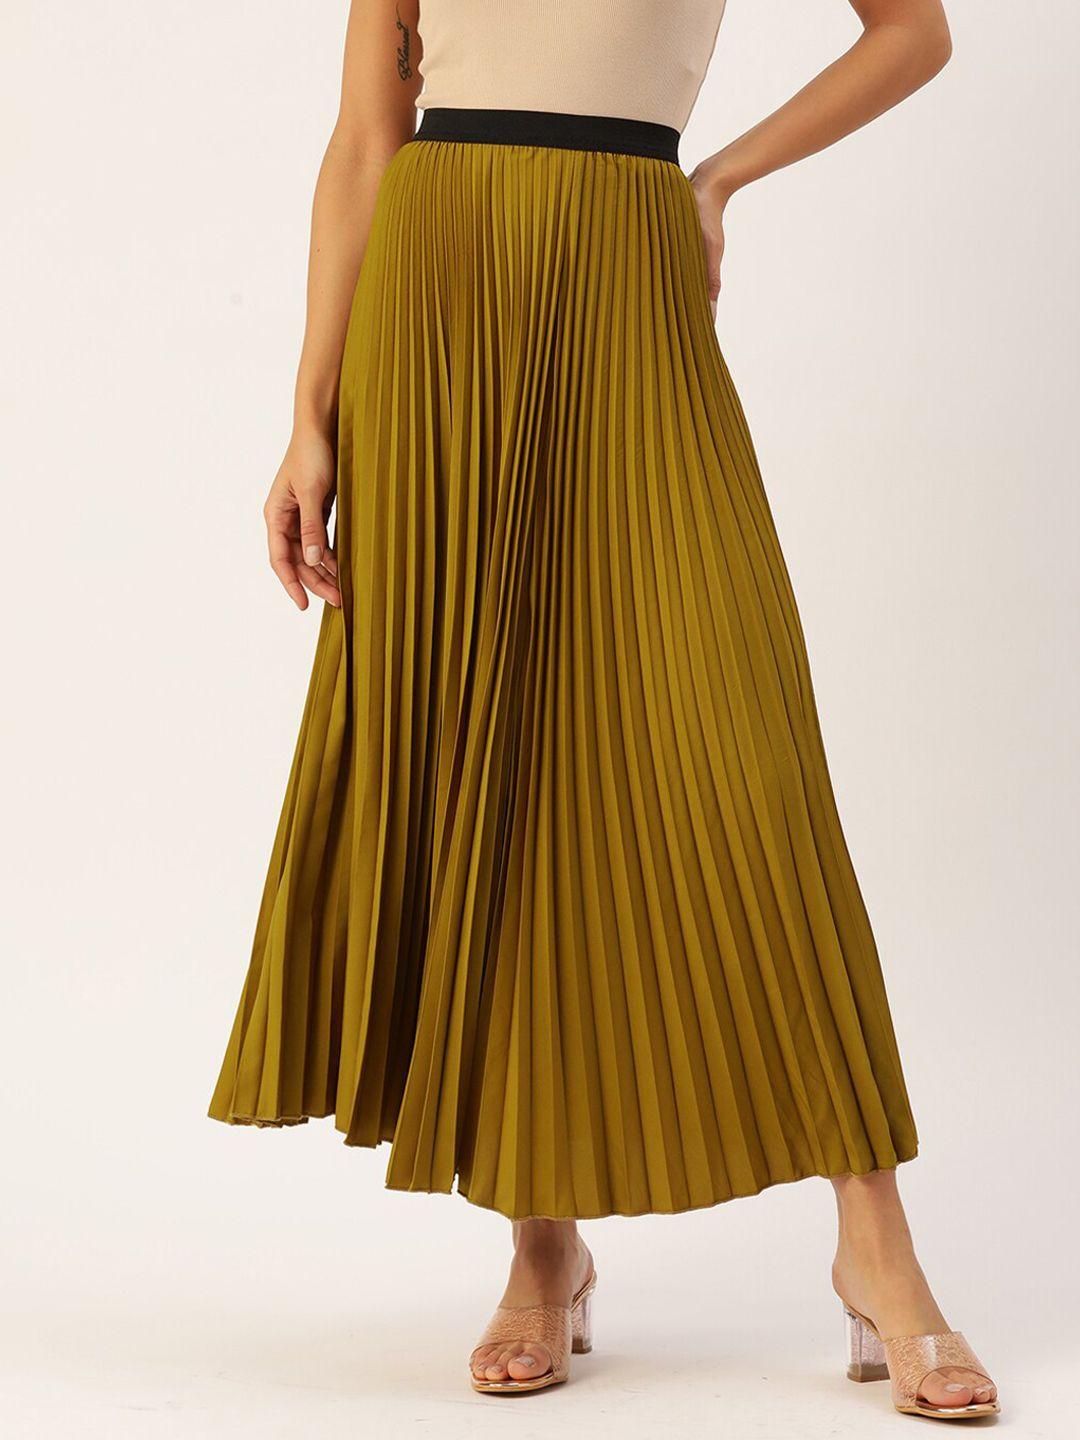 her-by-invictus-mustard-yellow-gathered-or-pleated-maxi-flared-skirt